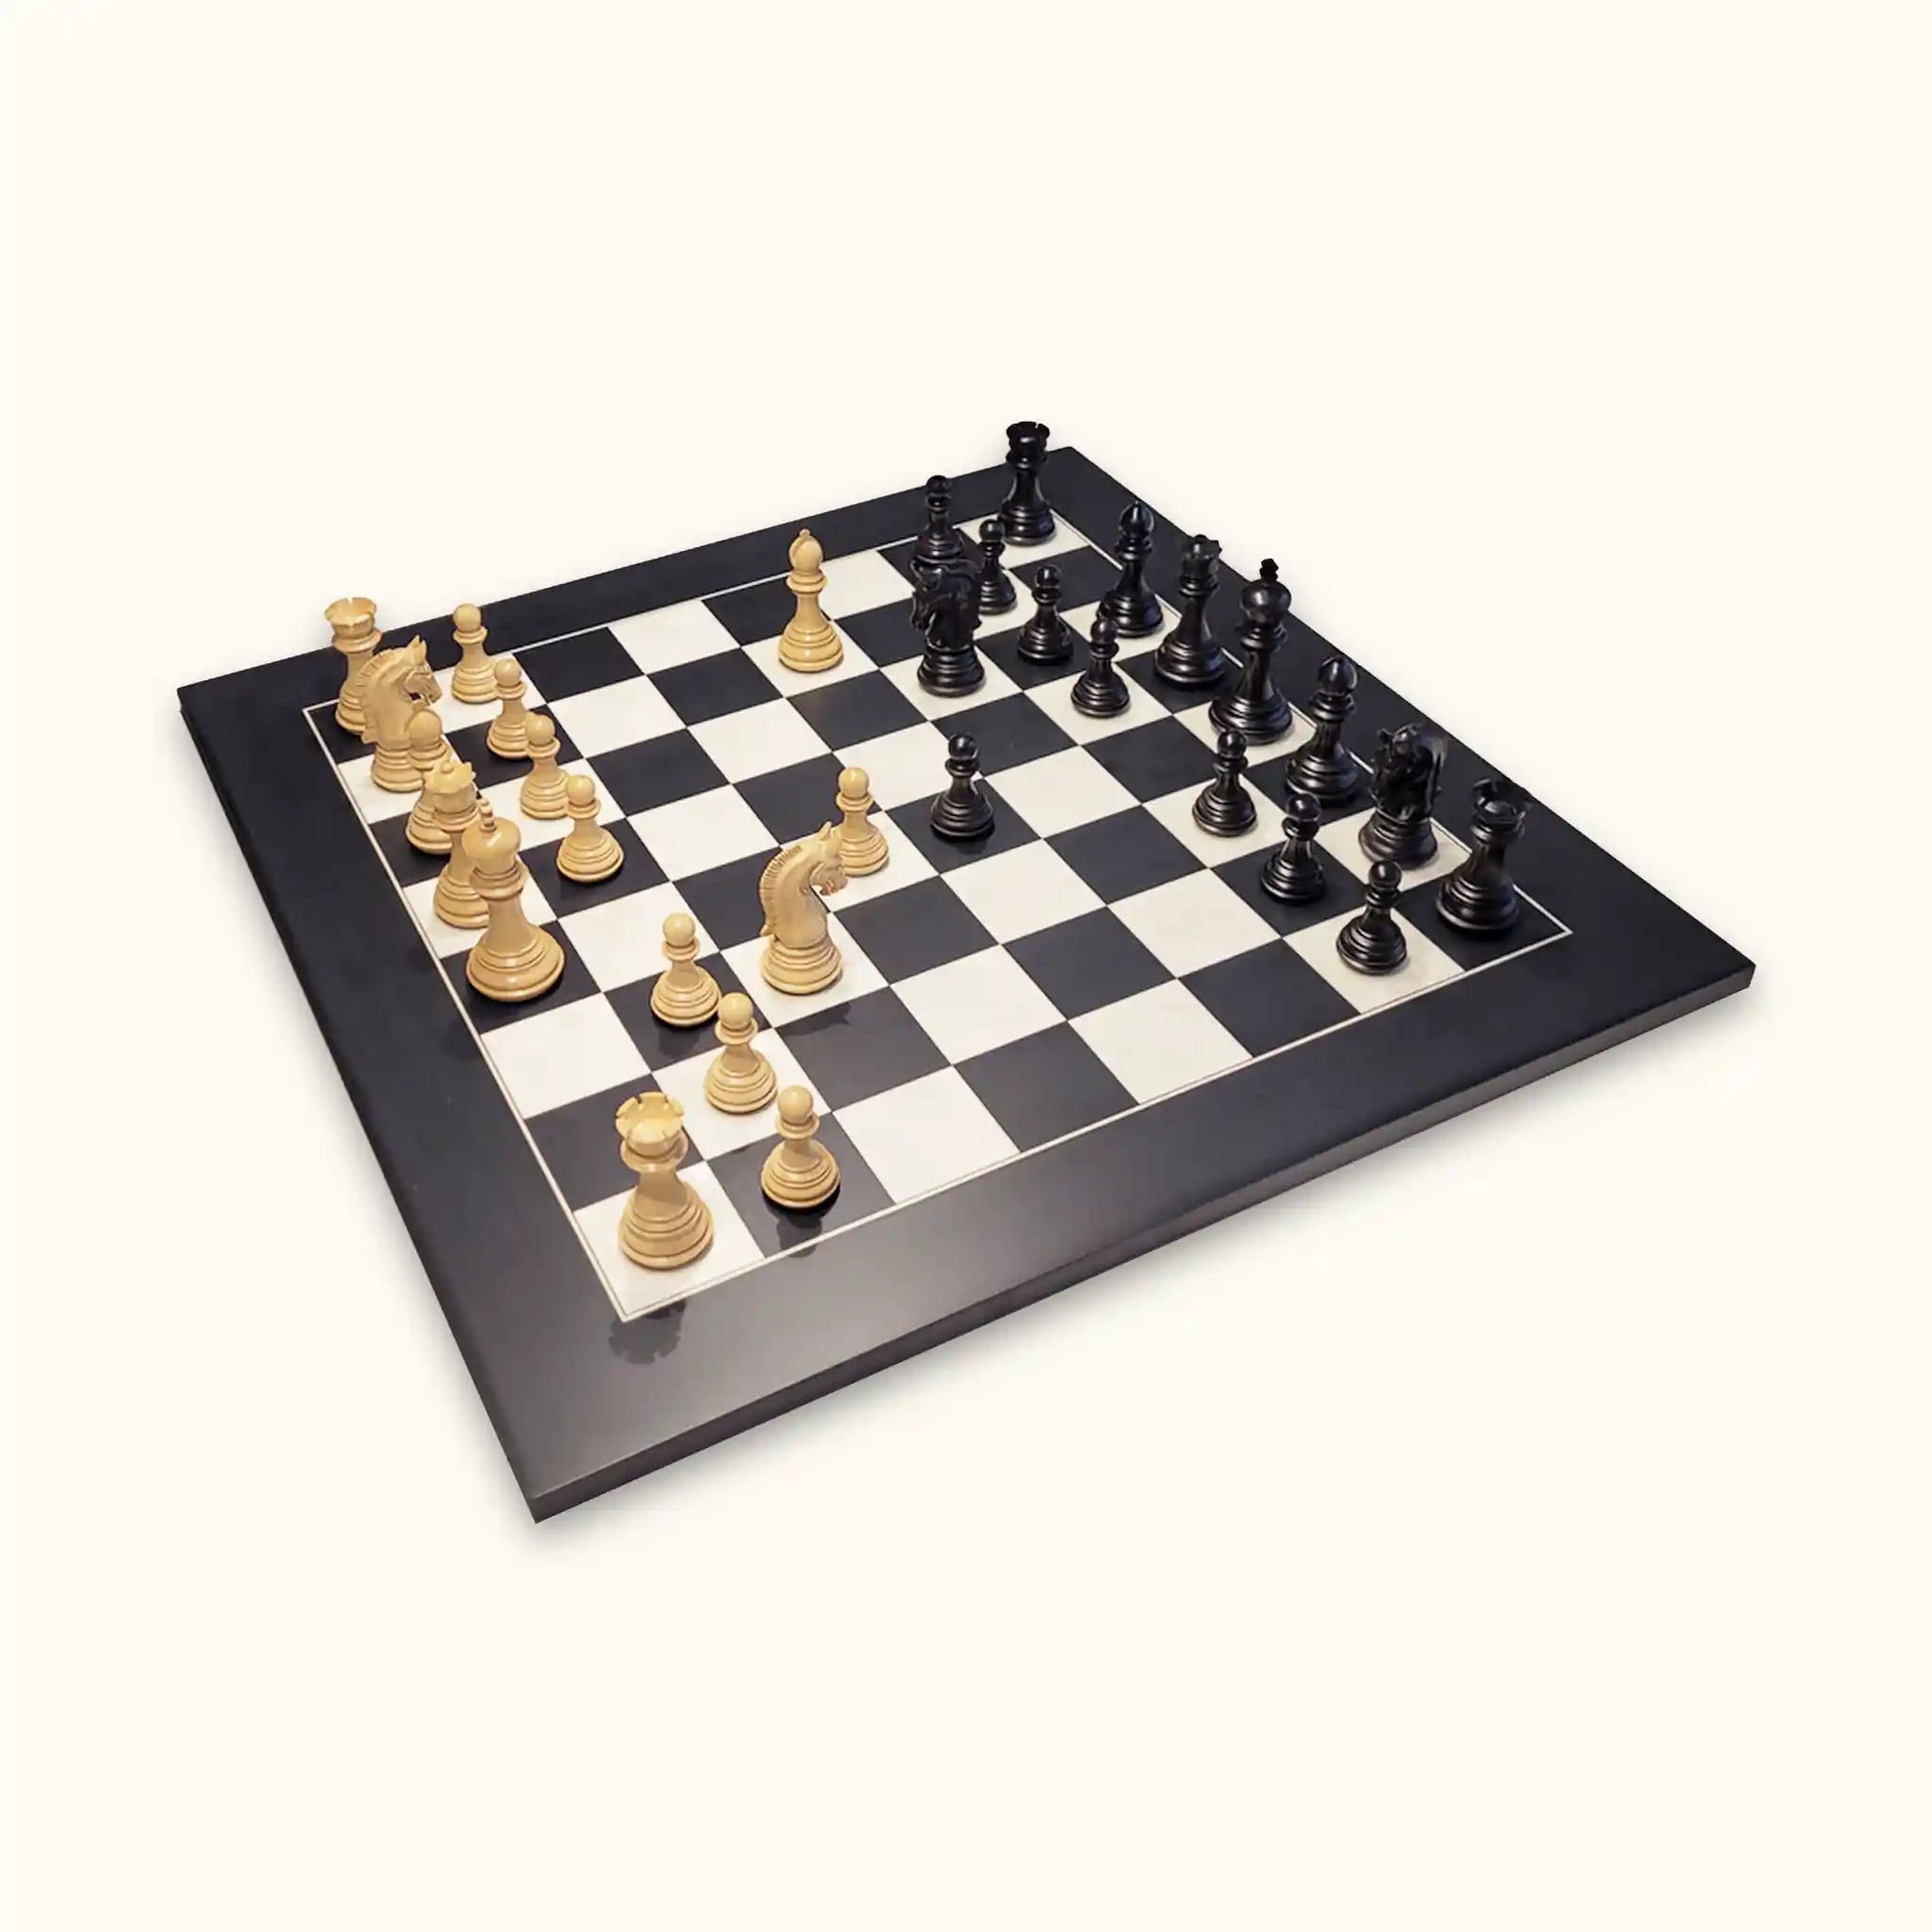 Chess pieces imperial black on black chessboard diagonal